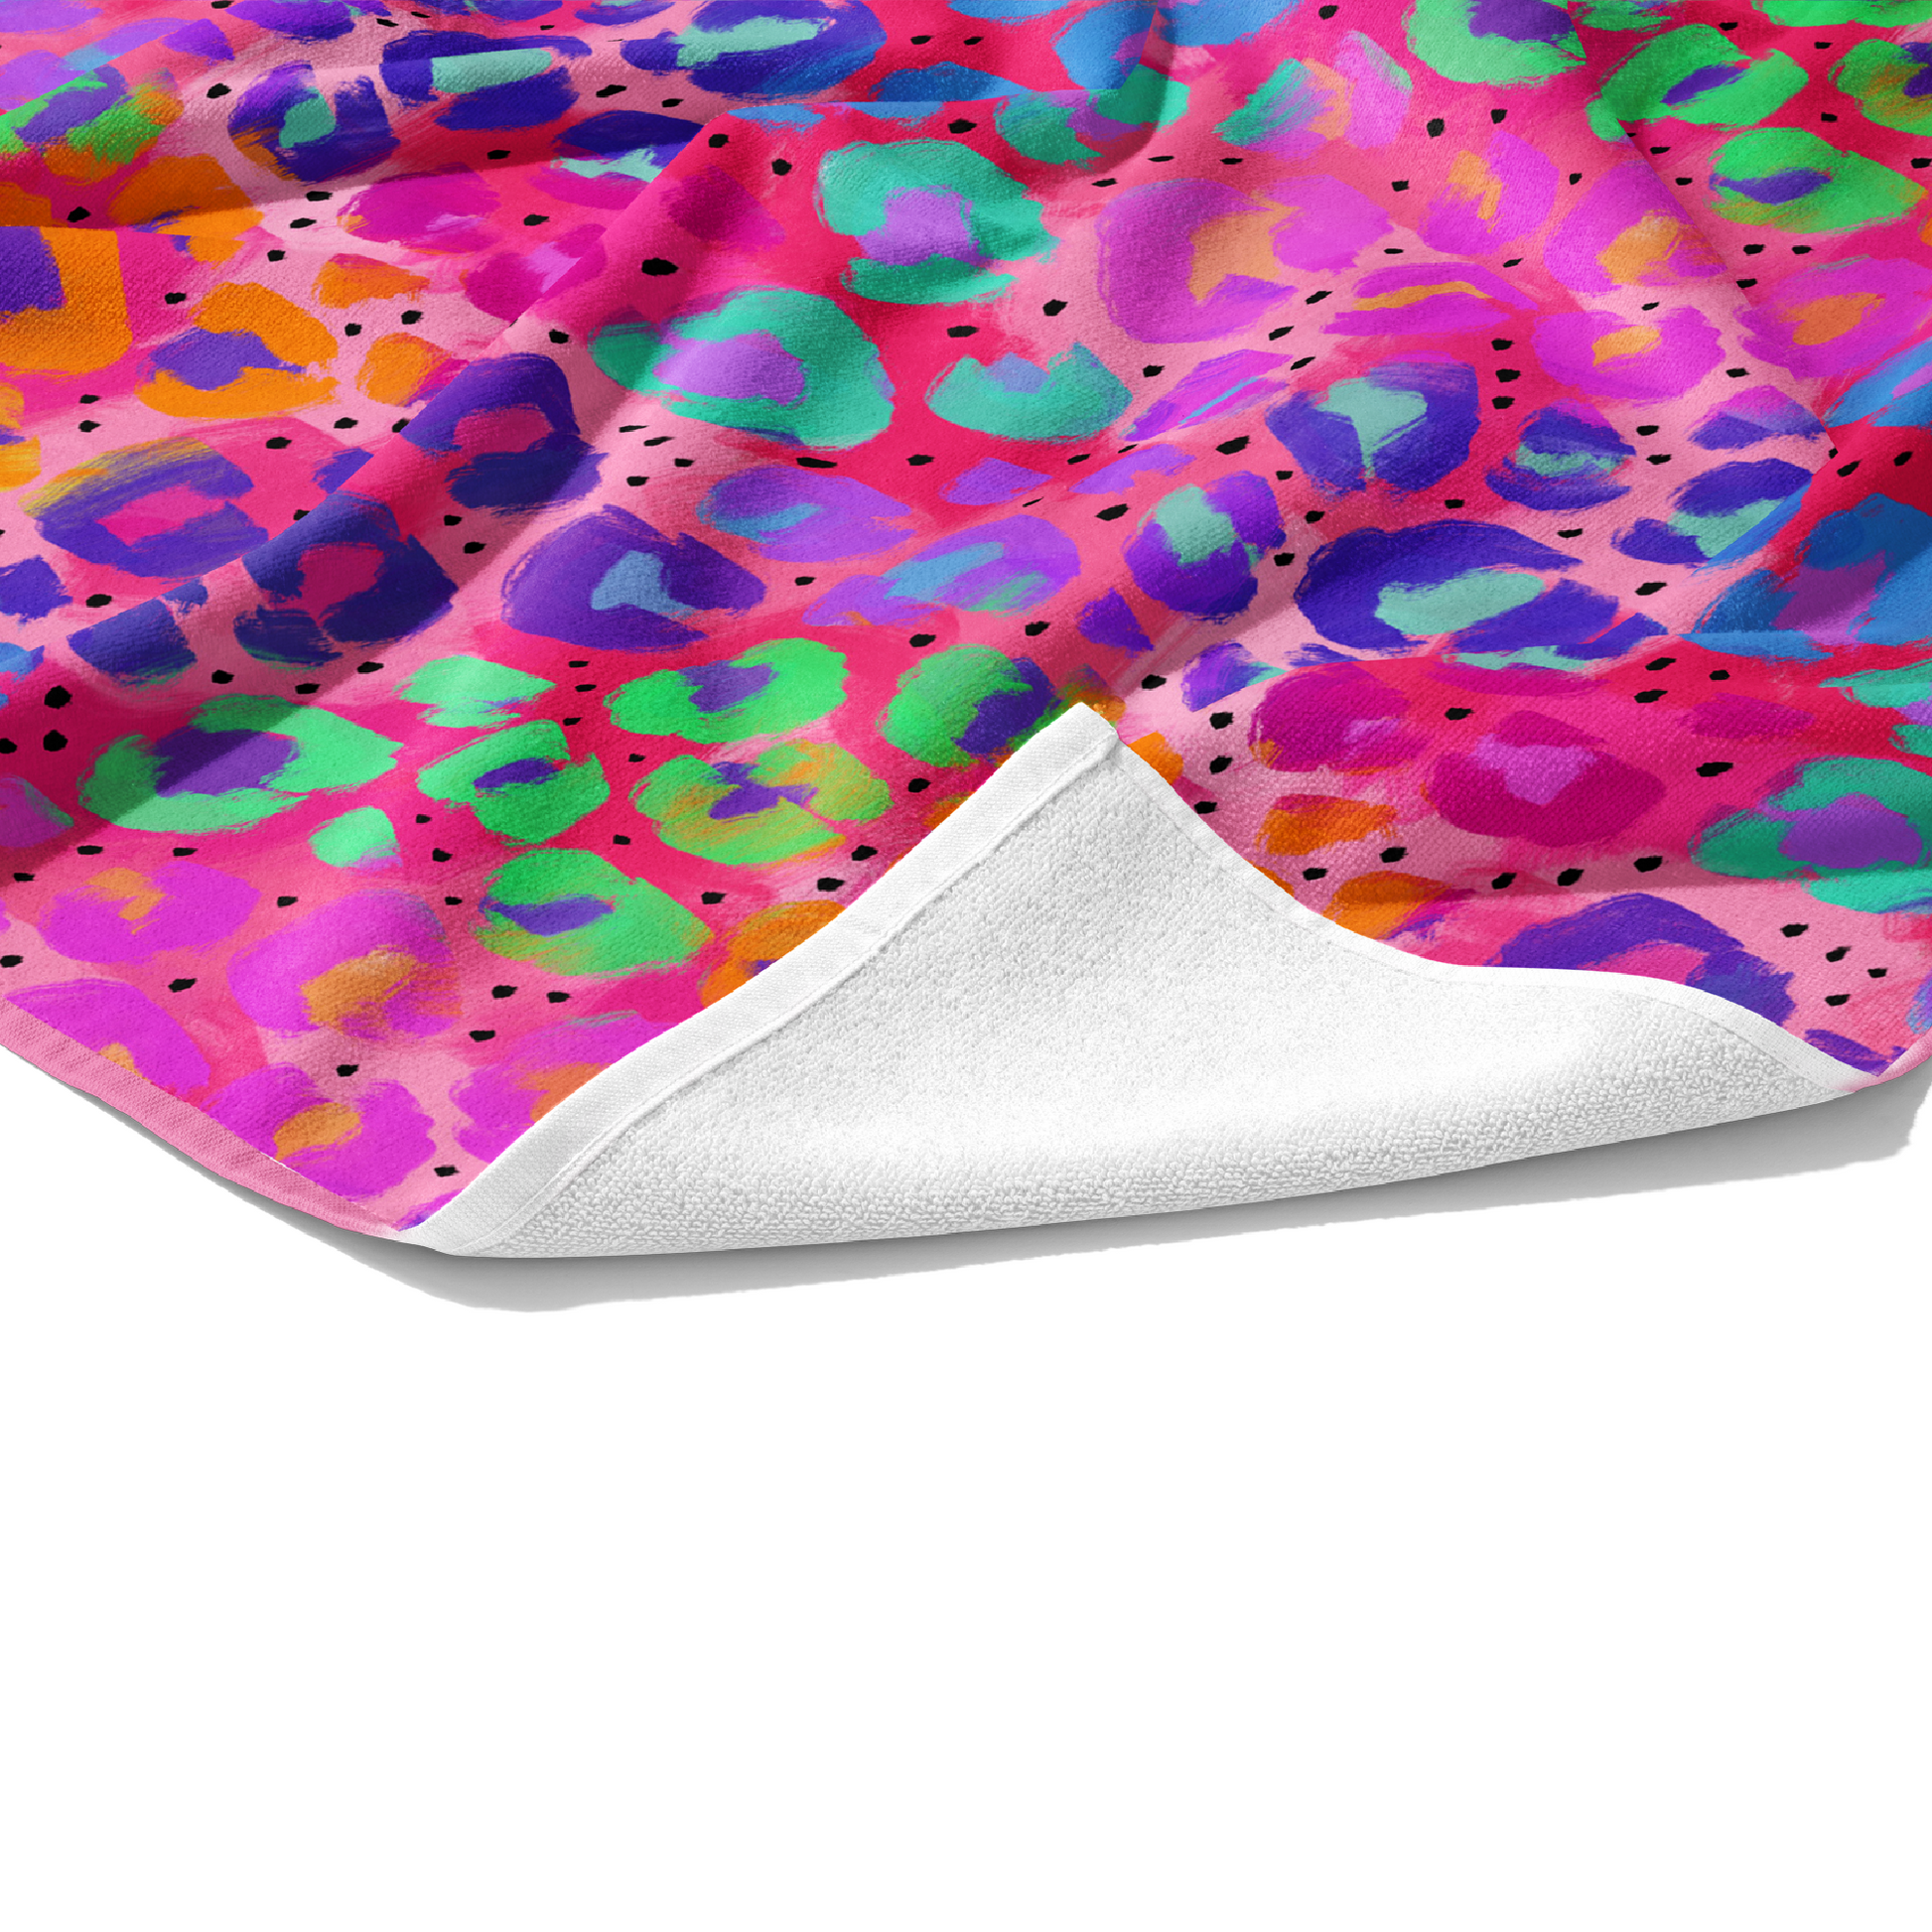 Plush white cotton customizable towel with bright pink, purple, green, yellow, and orange print on the front.